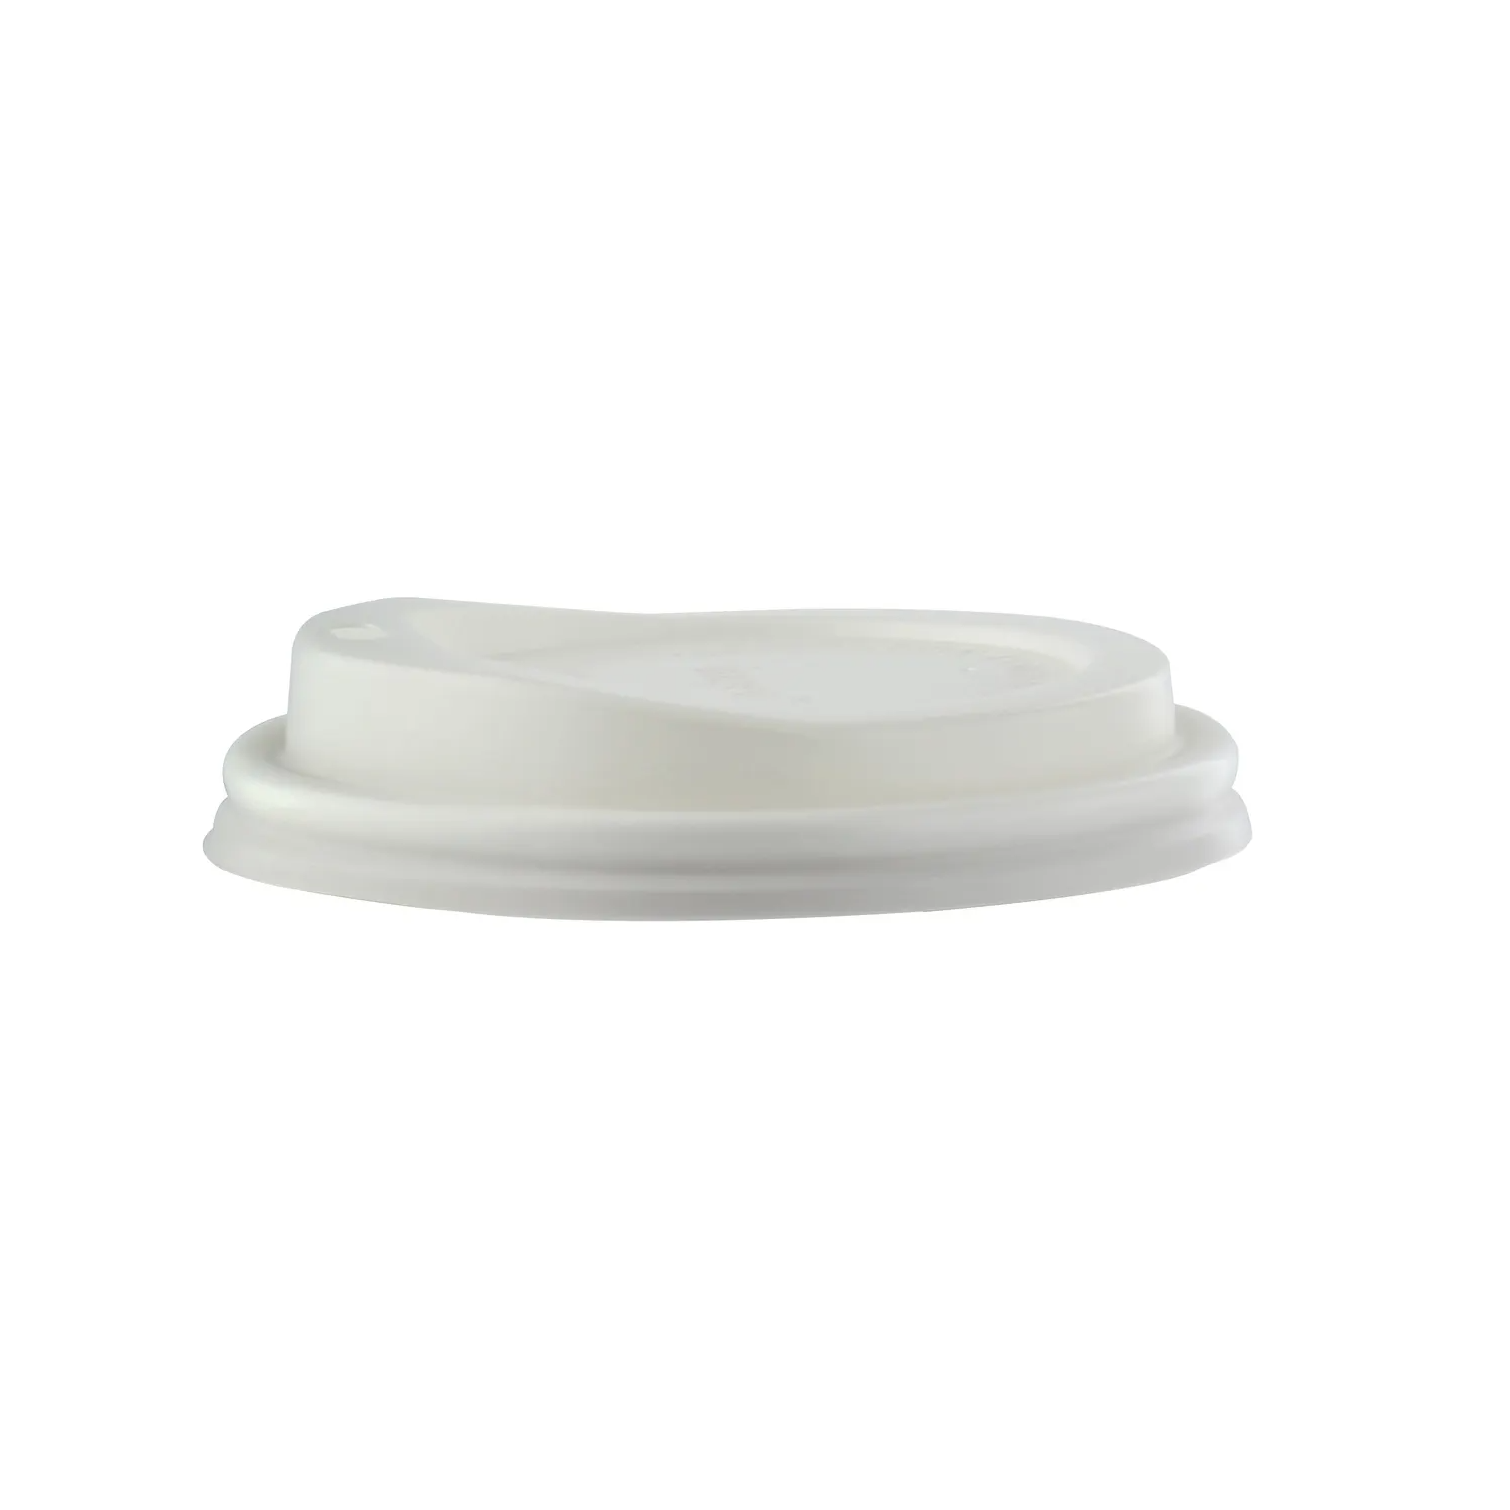 A white coffee cup lid